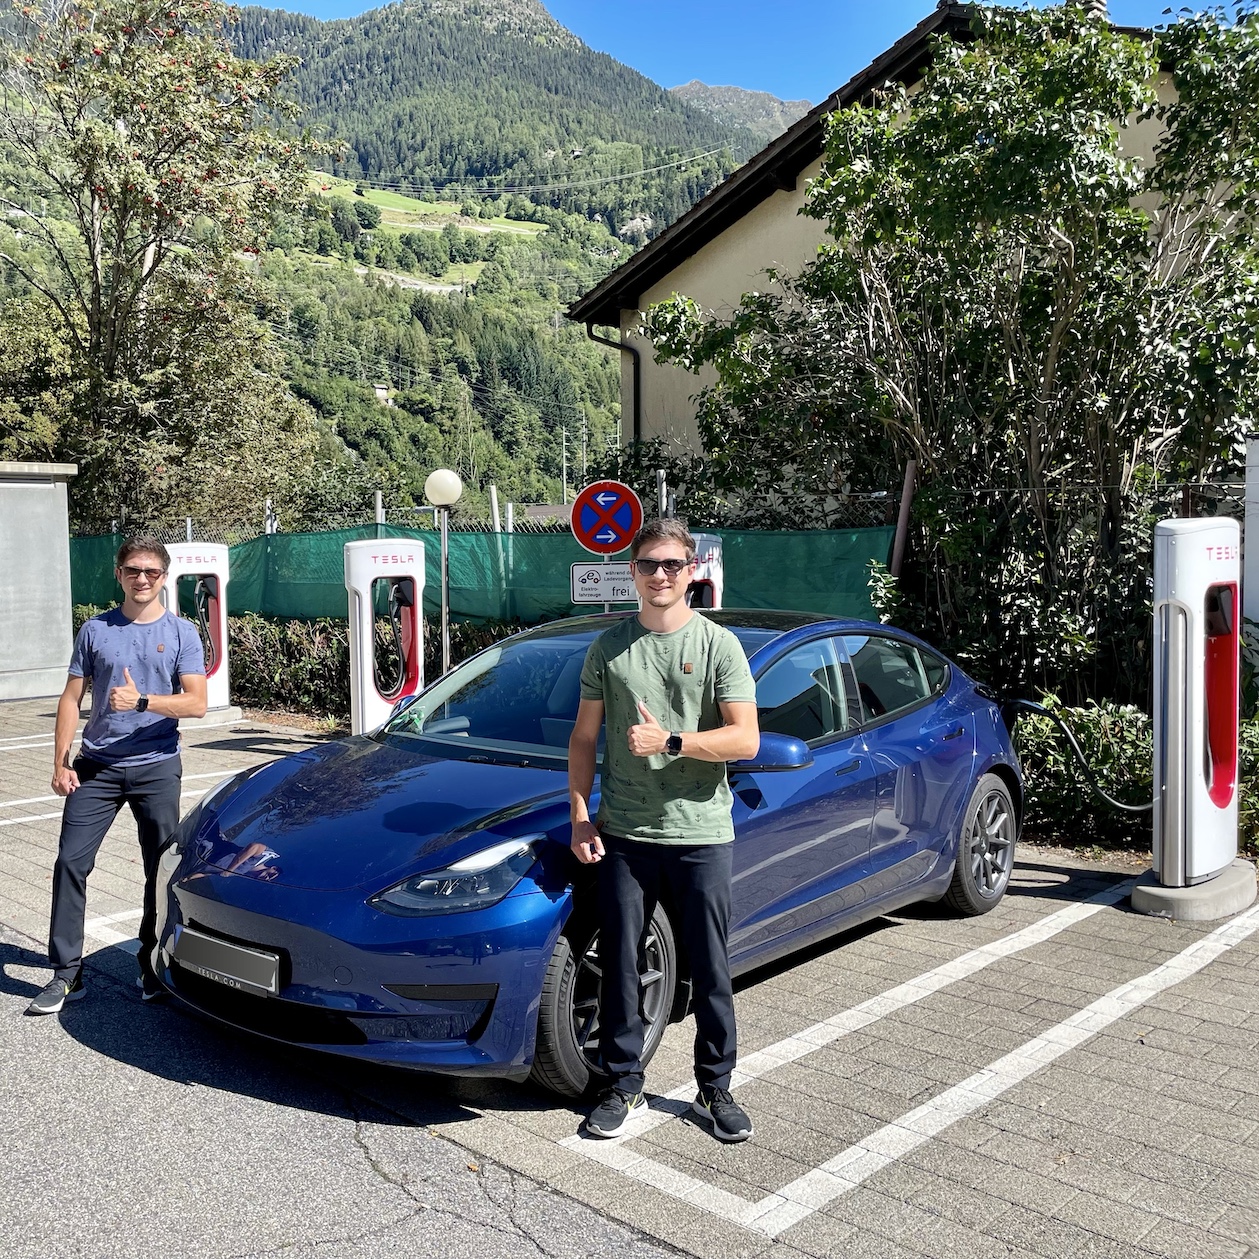 Supercharger in Quinto